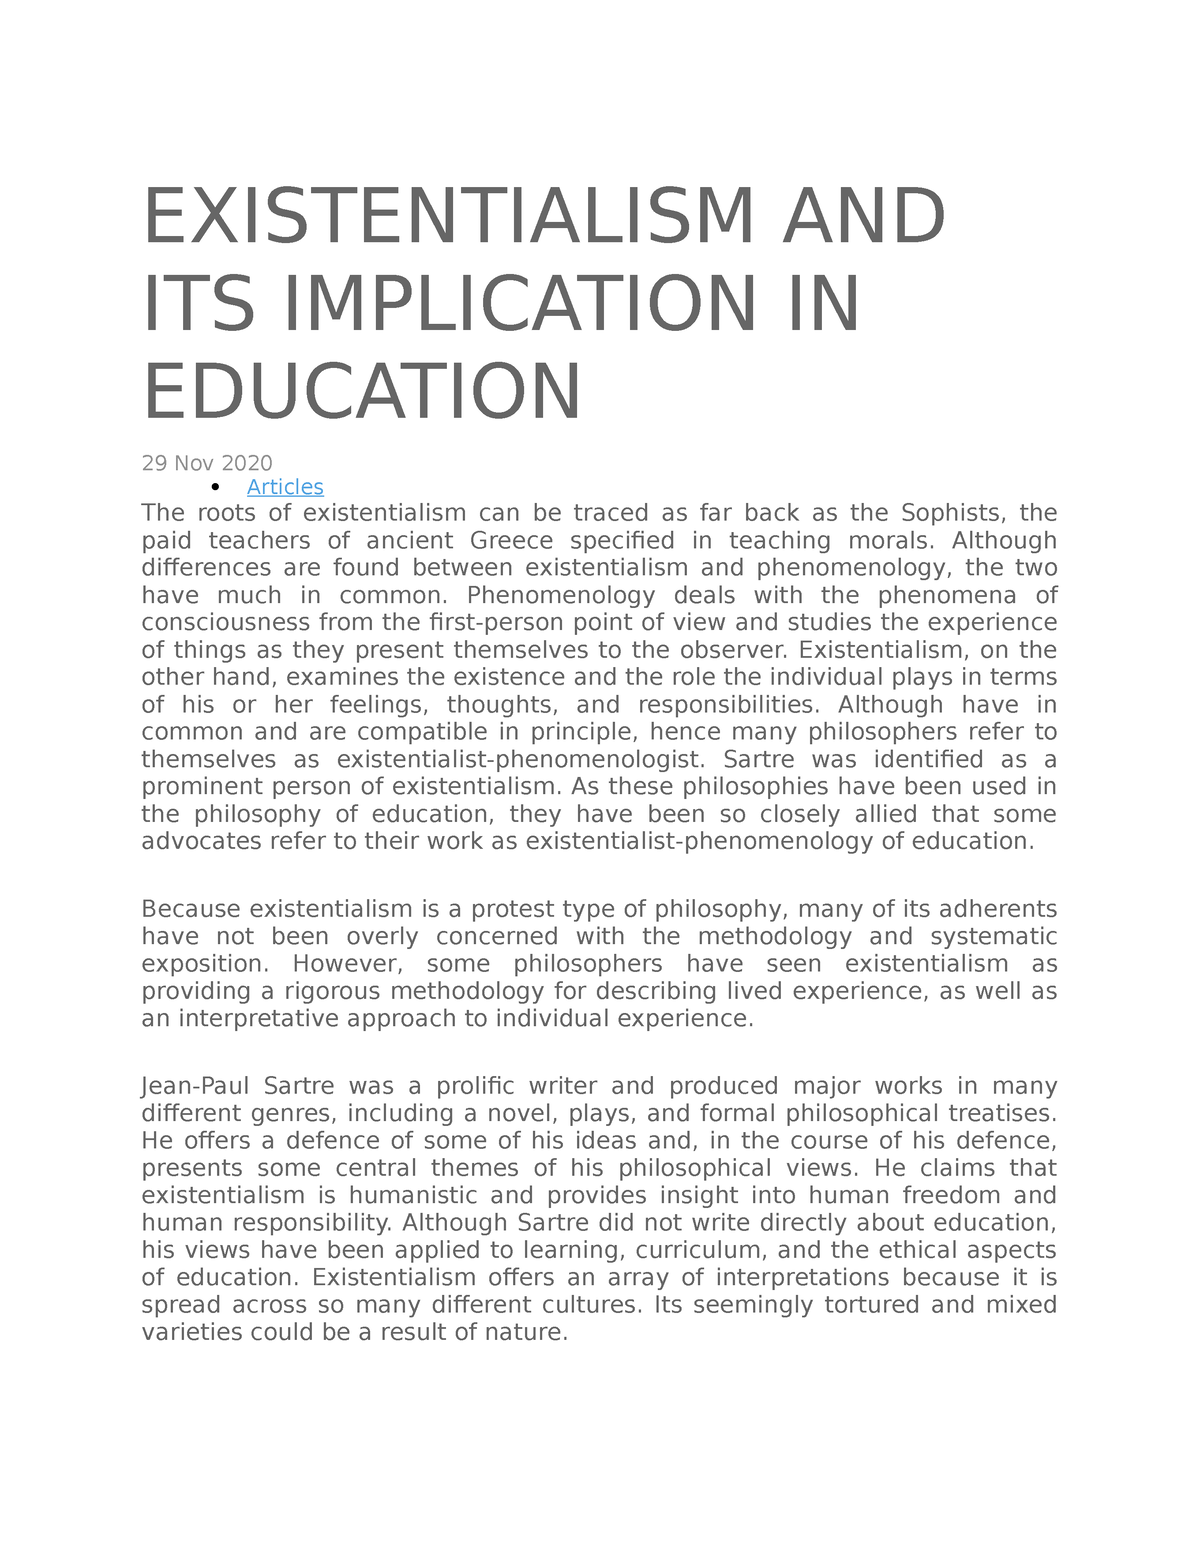 essay about existentialism philosophy